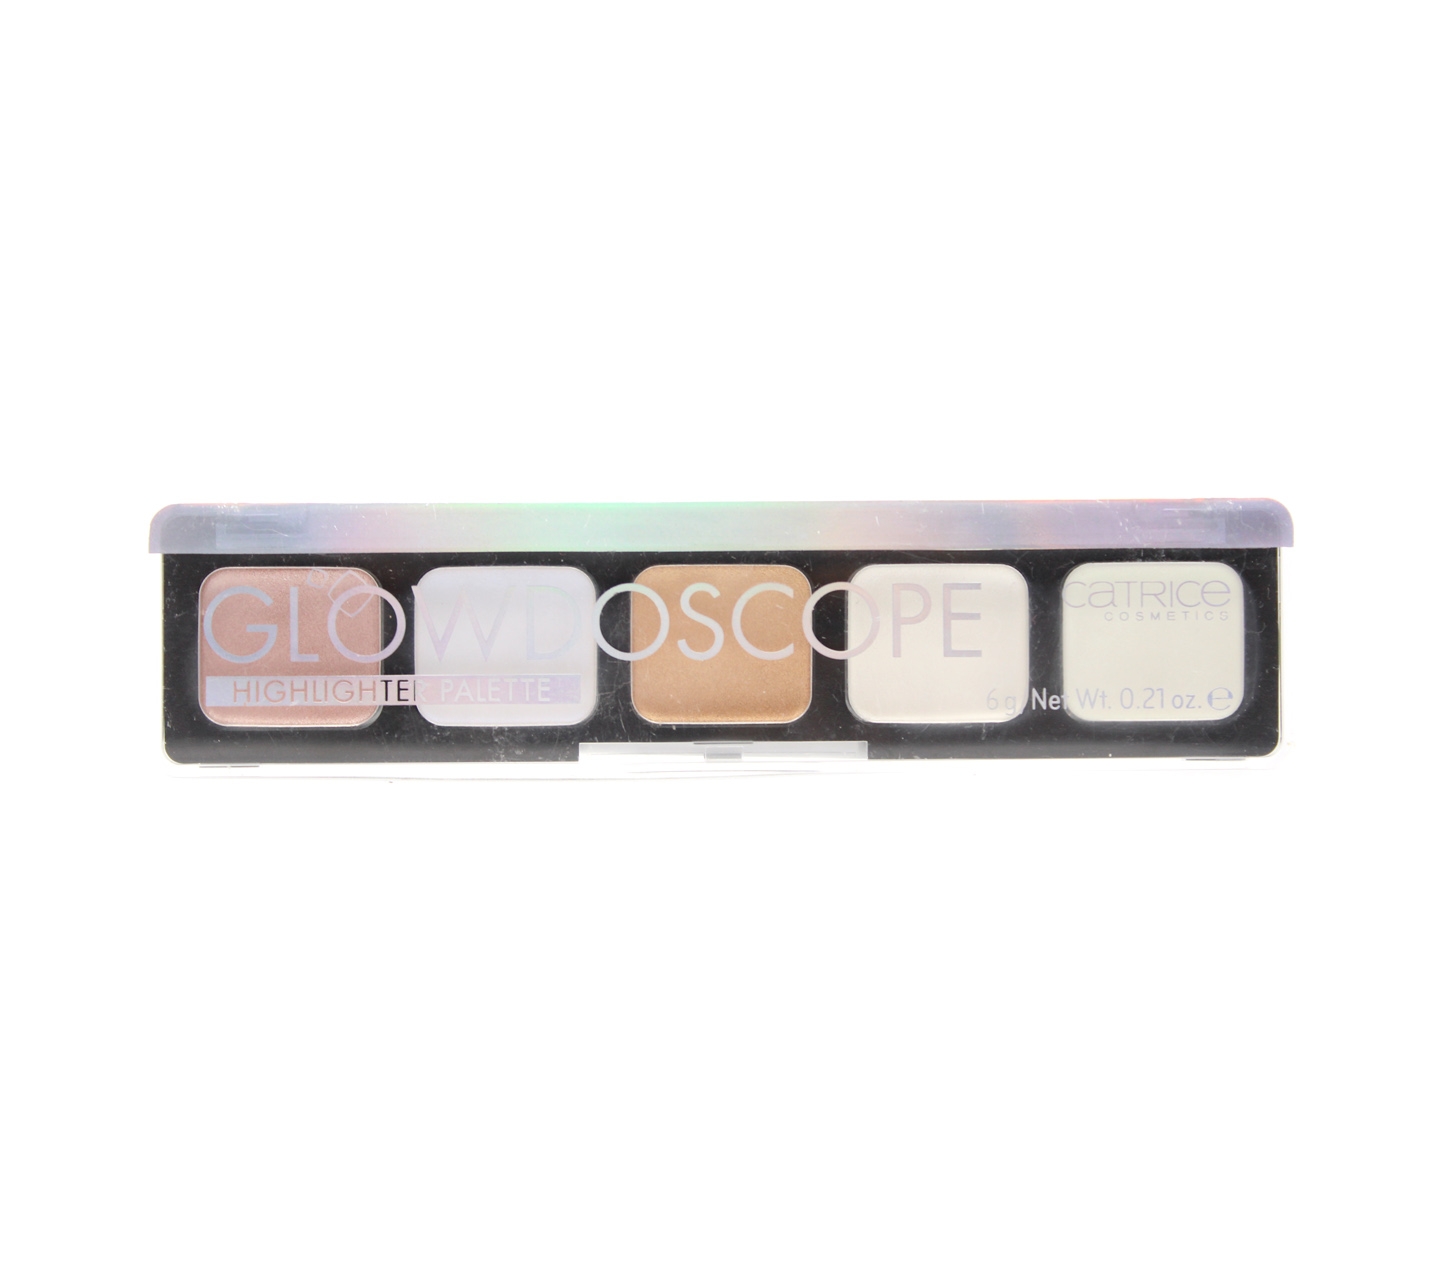 Catrice Glowdoscope Highligter Sets and Palette